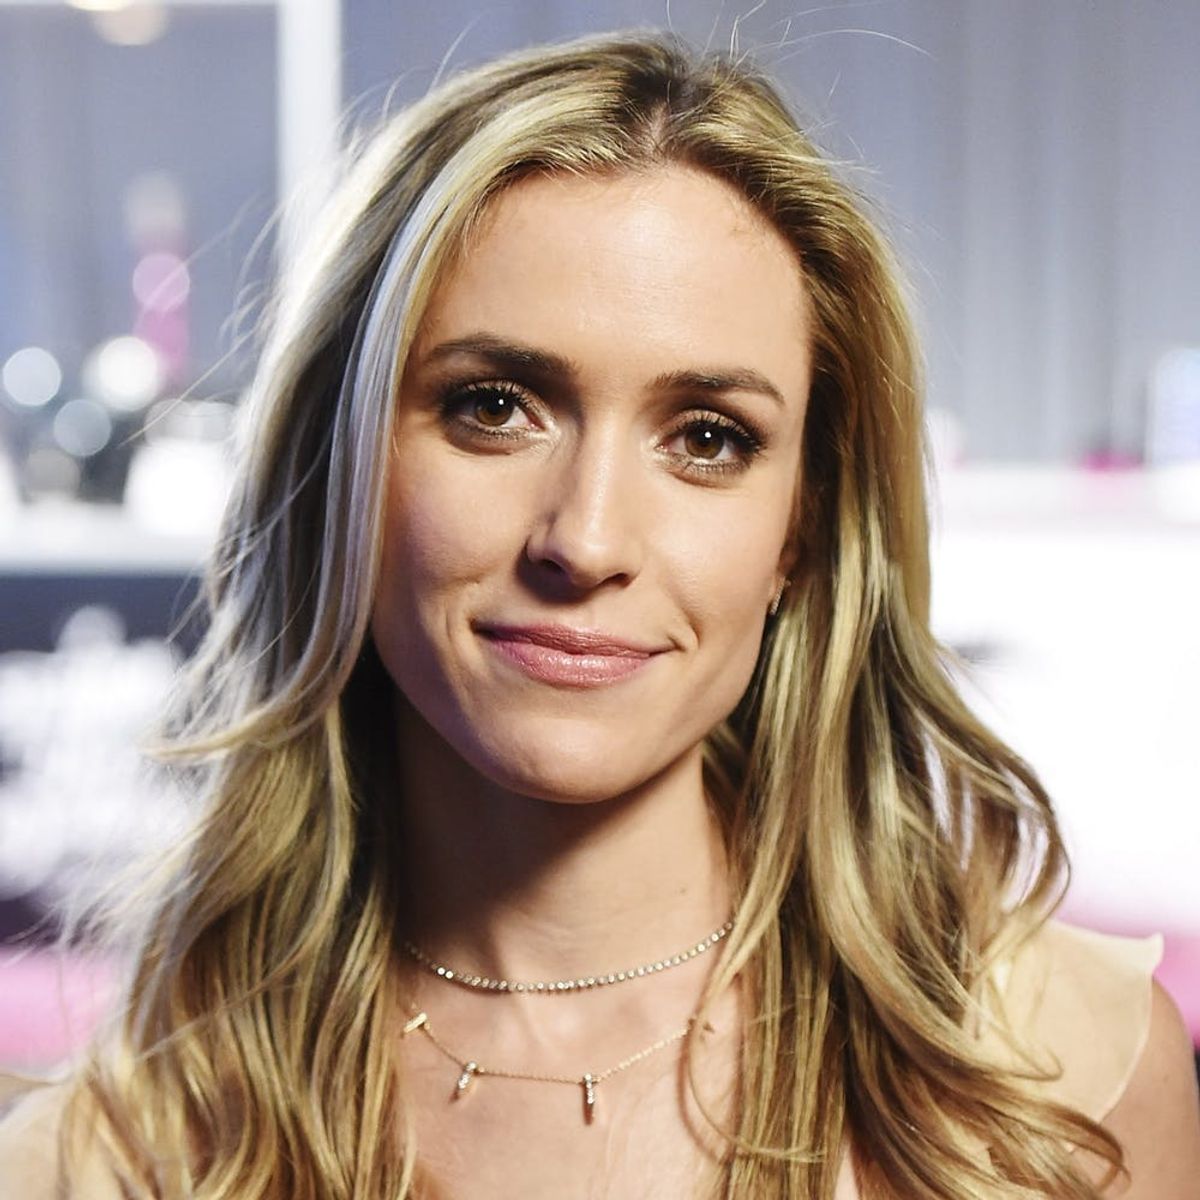 Kristin Cavallari Is Firing Back at People Who Criticized Her for Making a Joke About Her Muscles